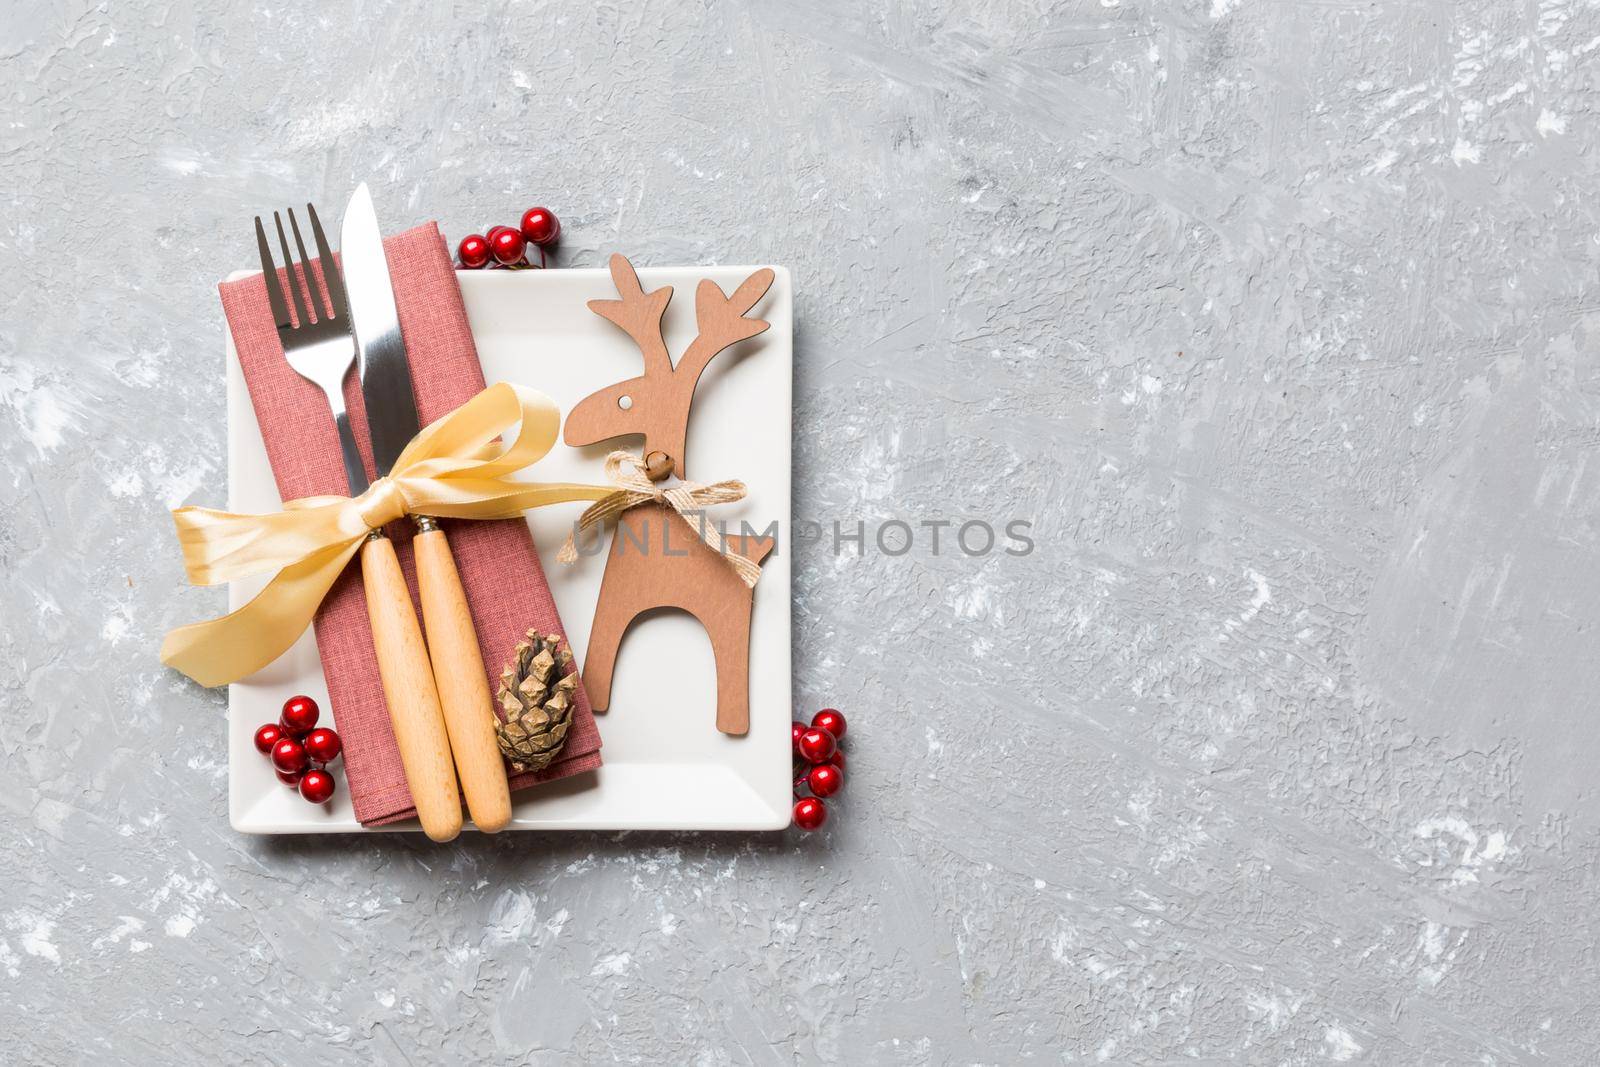 Top view of holiday dinner decorated with dried fruit and cinnamon on cement background. Set of plate, urensil and New Year decorations. Christmas time concept with epmty space for your design.